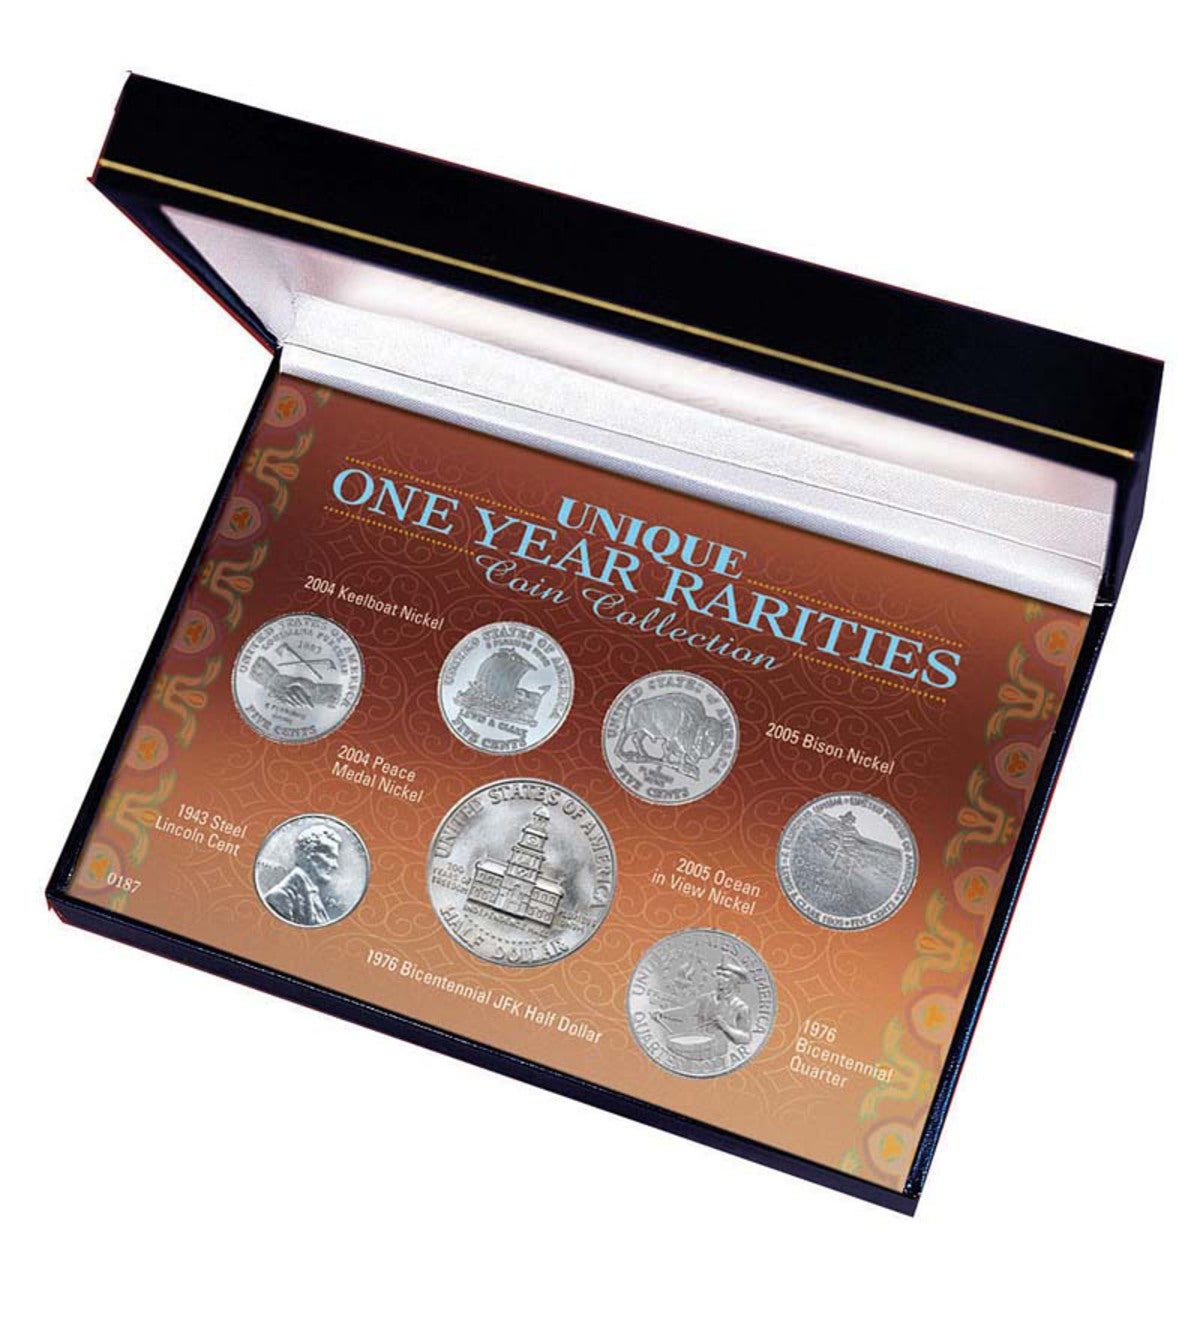 Collectable Unique One Year Coin Rarities Boxed Set